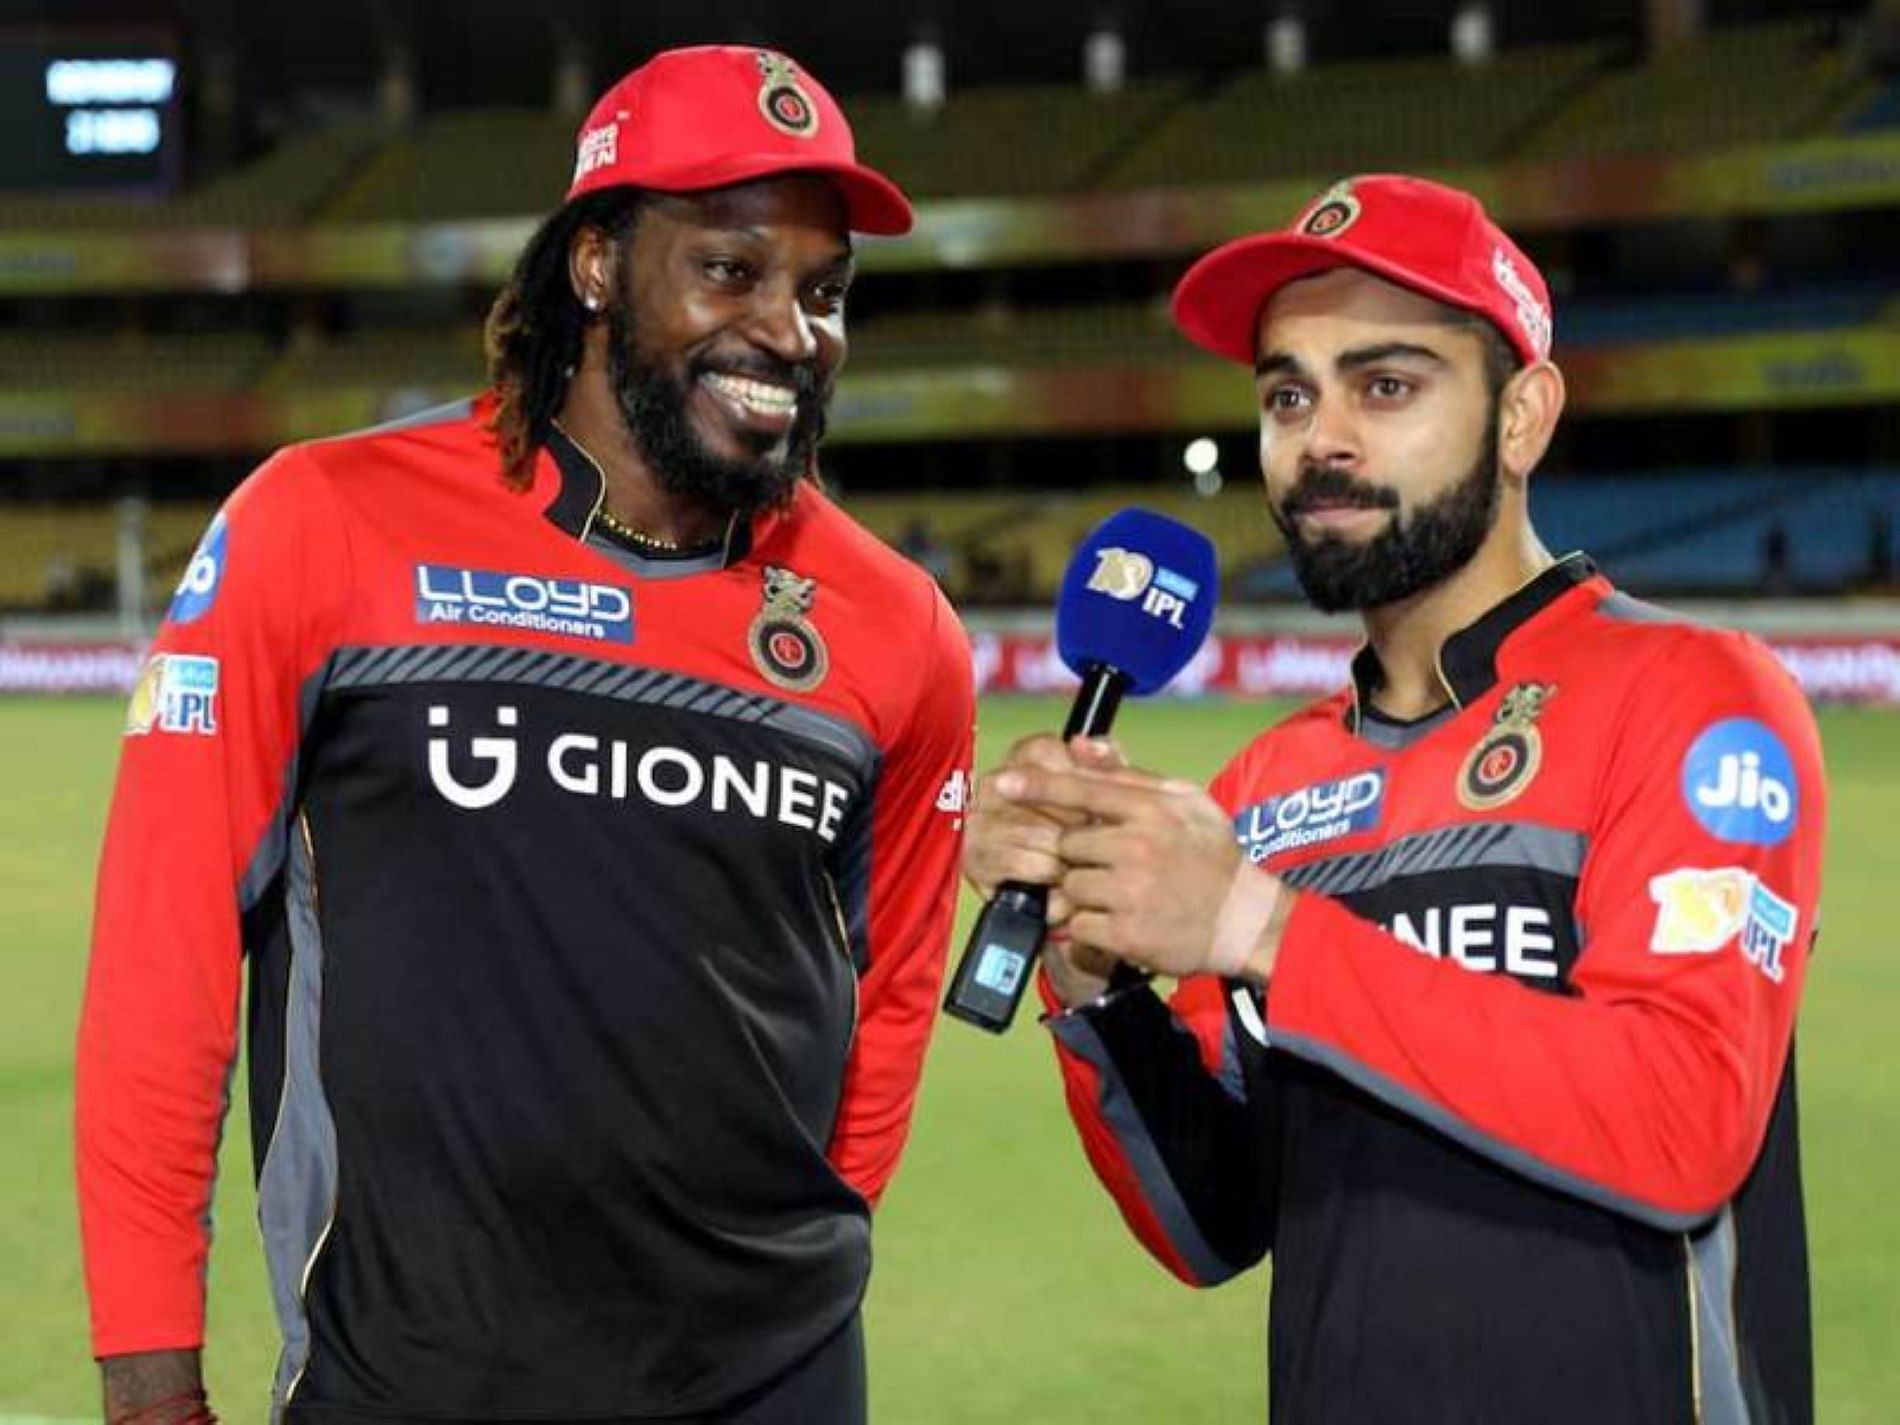 Chris Gayle and Virat Kohli formed one of the most formidable partnerships in IPL history